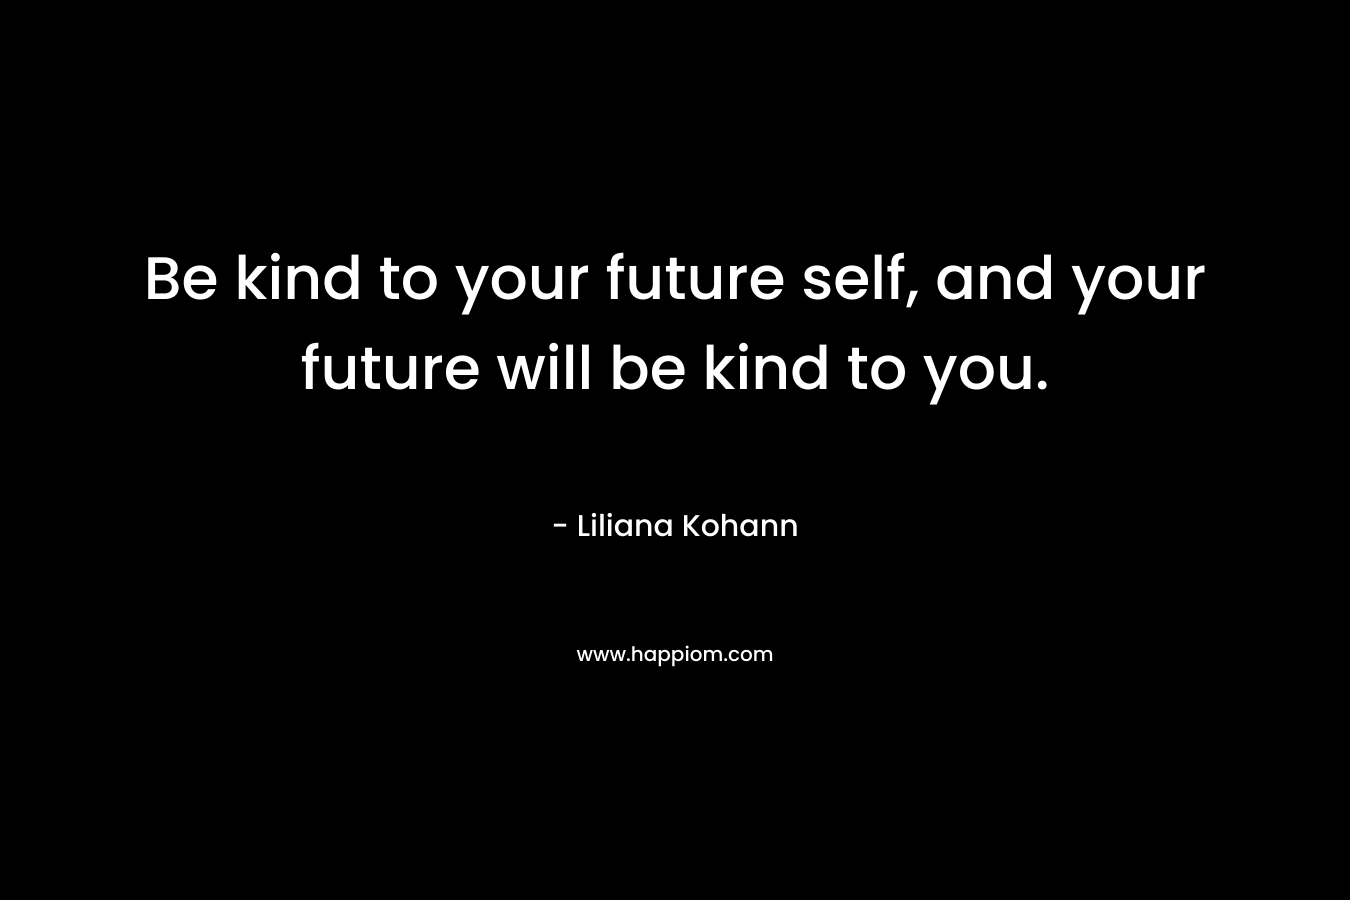 Be kind to your future self, and your future will be kind to you.